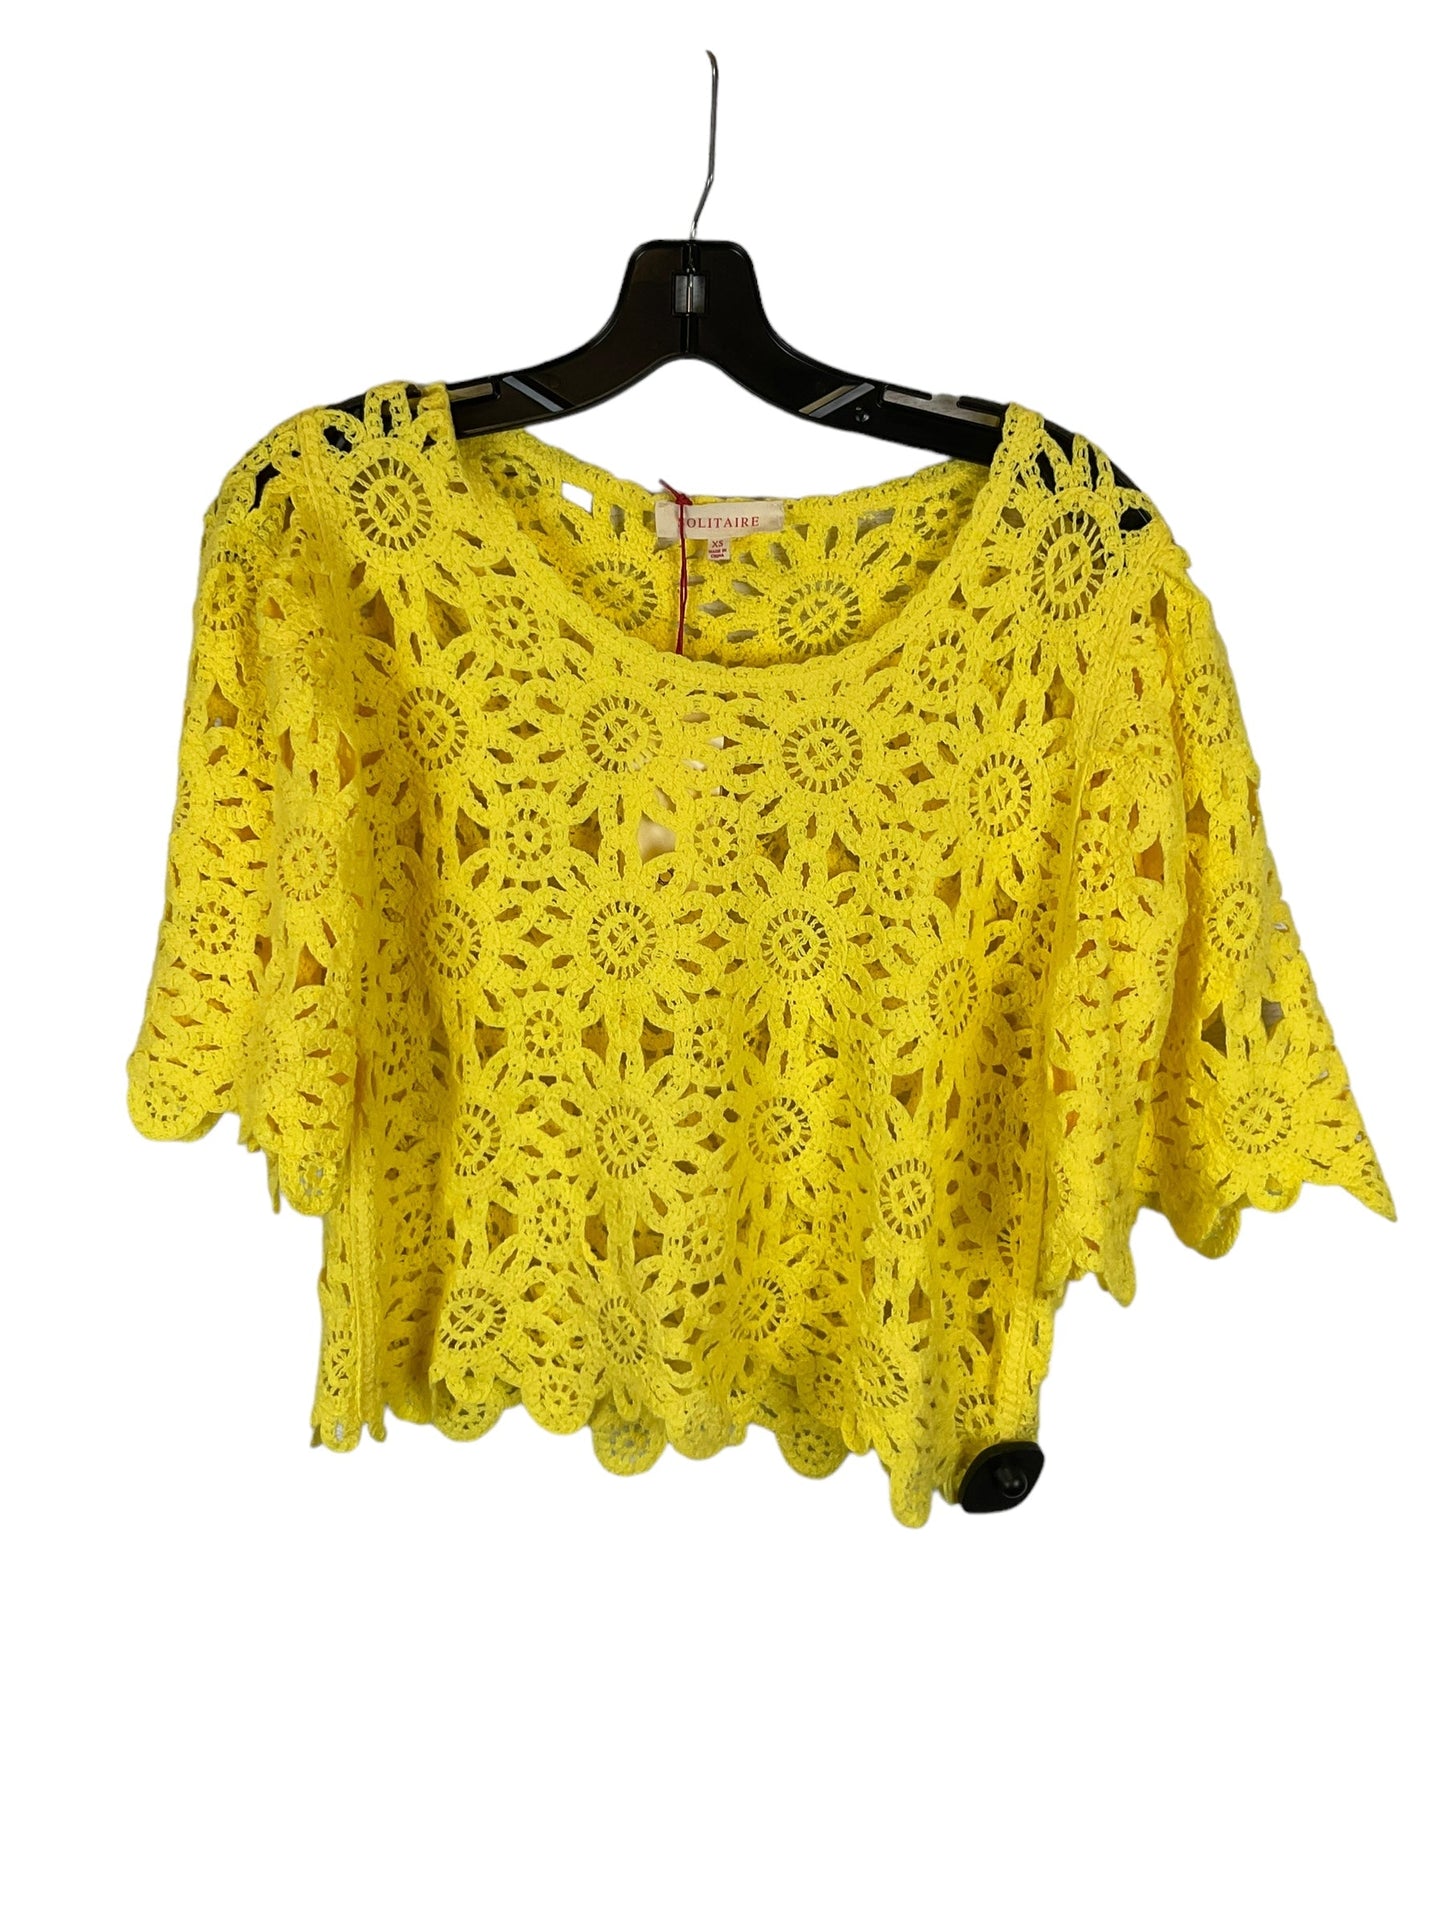 Yellow Top Short Sleeve Solitaire, Size Xs